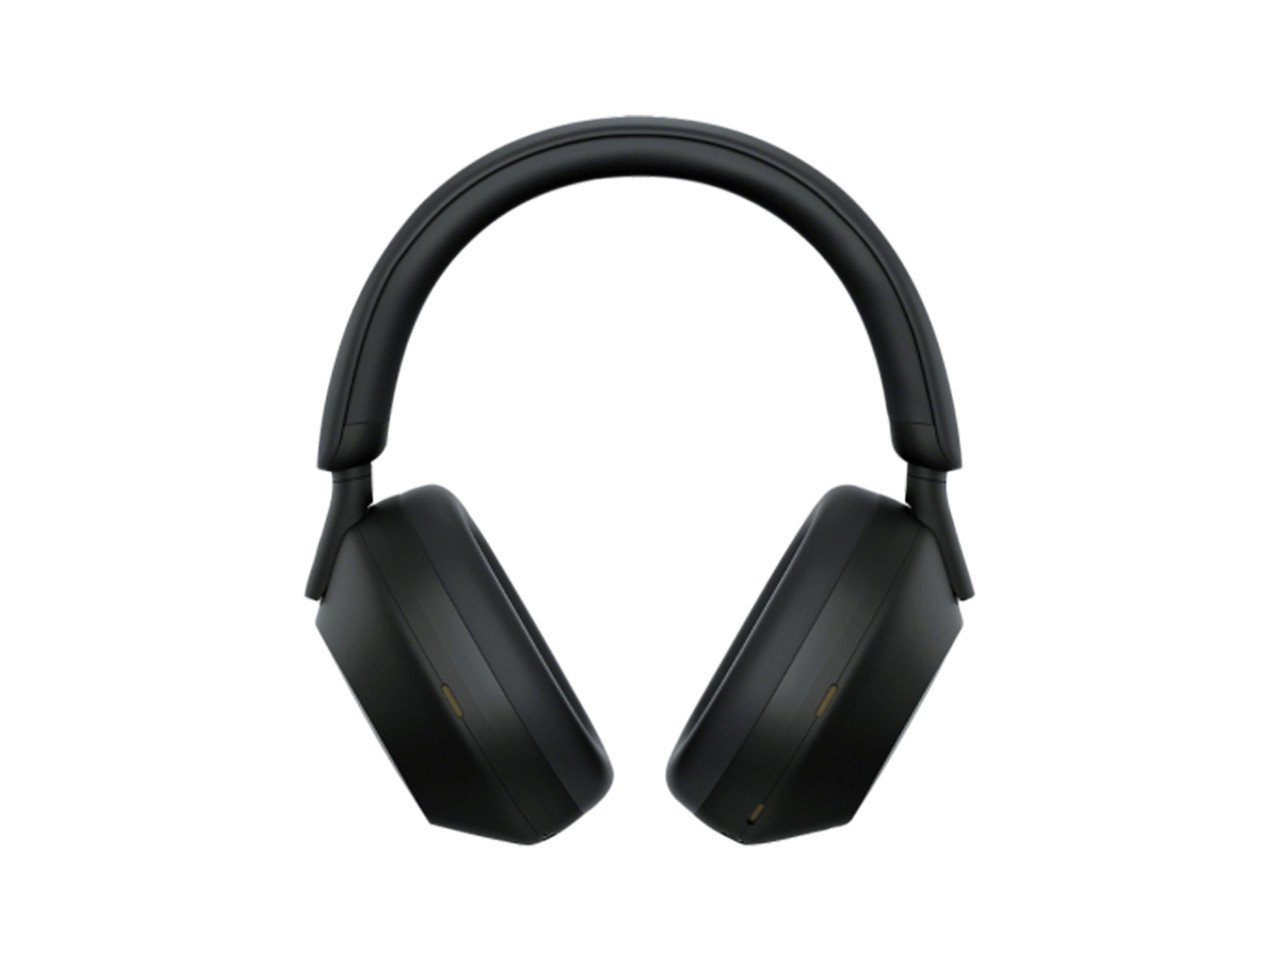 WH-1000XM5, Wireless Noise Cancelling Headphones